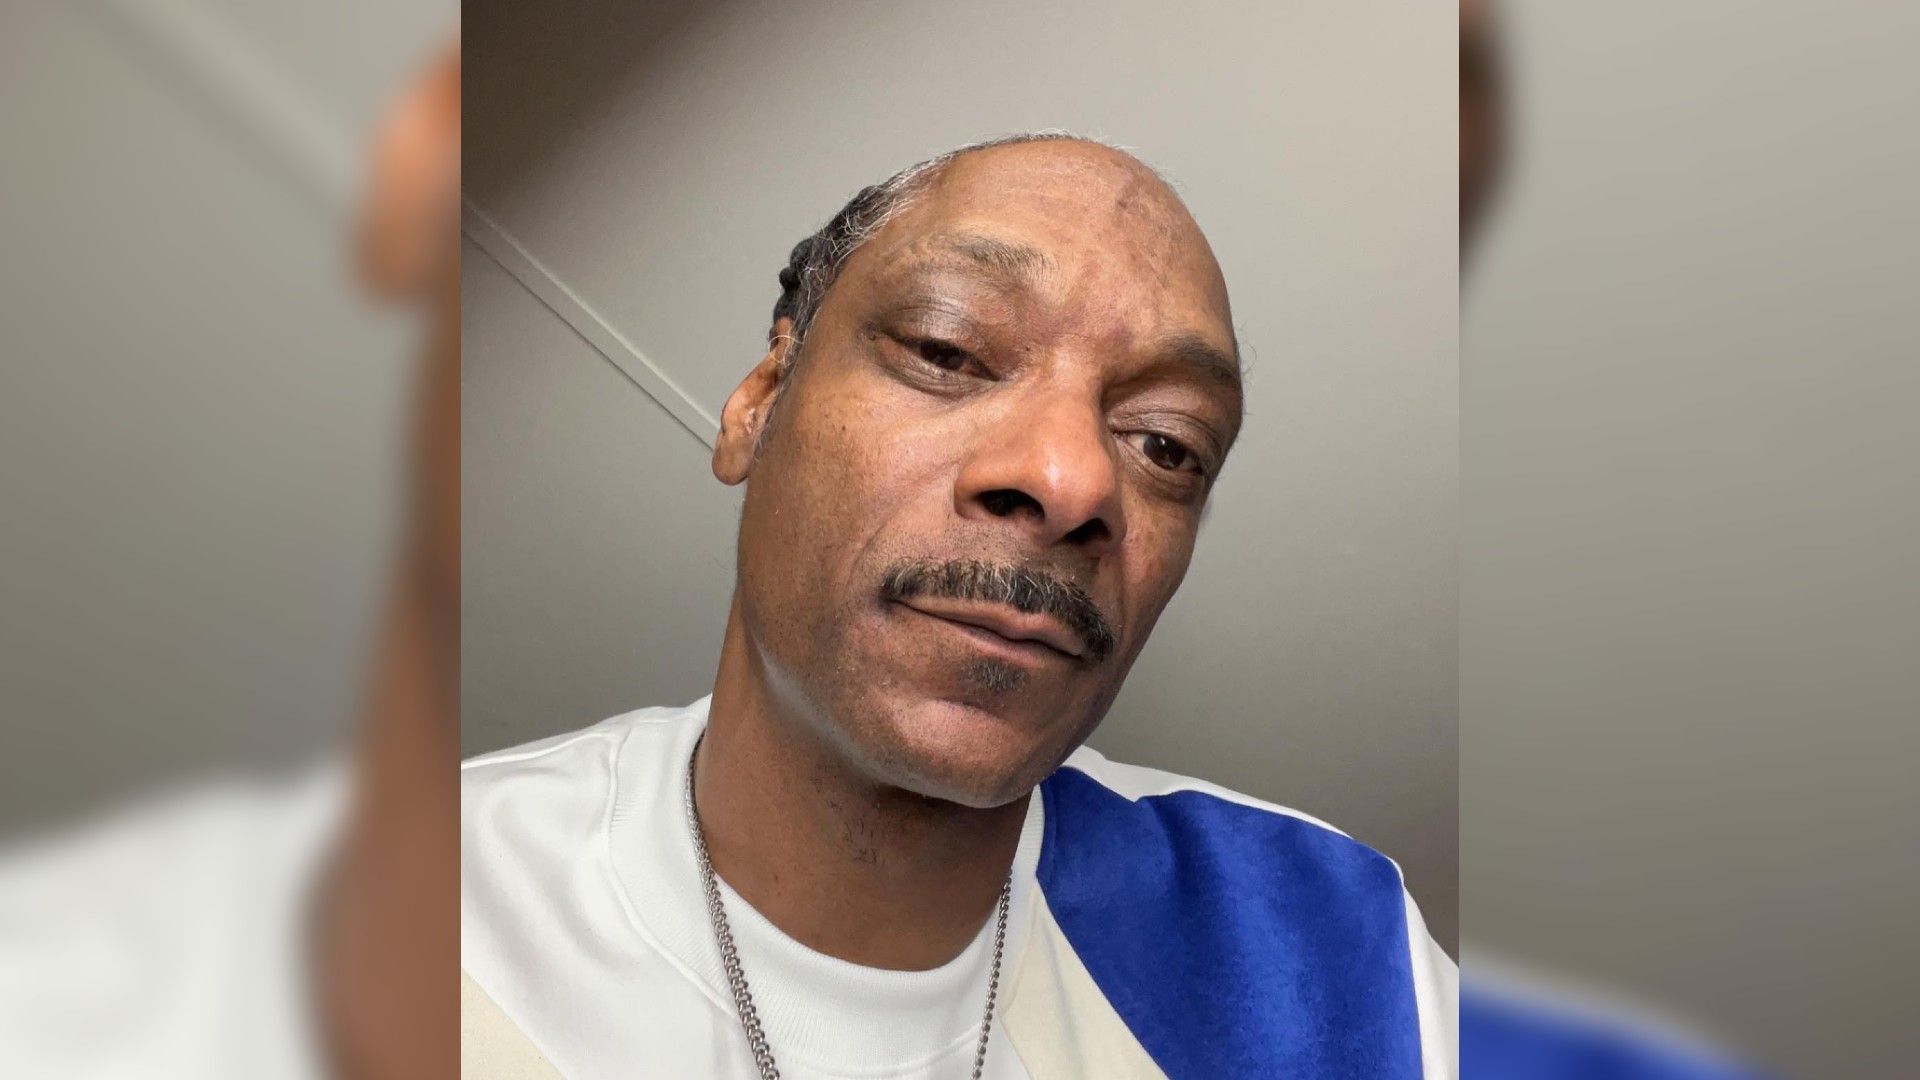 Snoop Dogg is 52 years old now